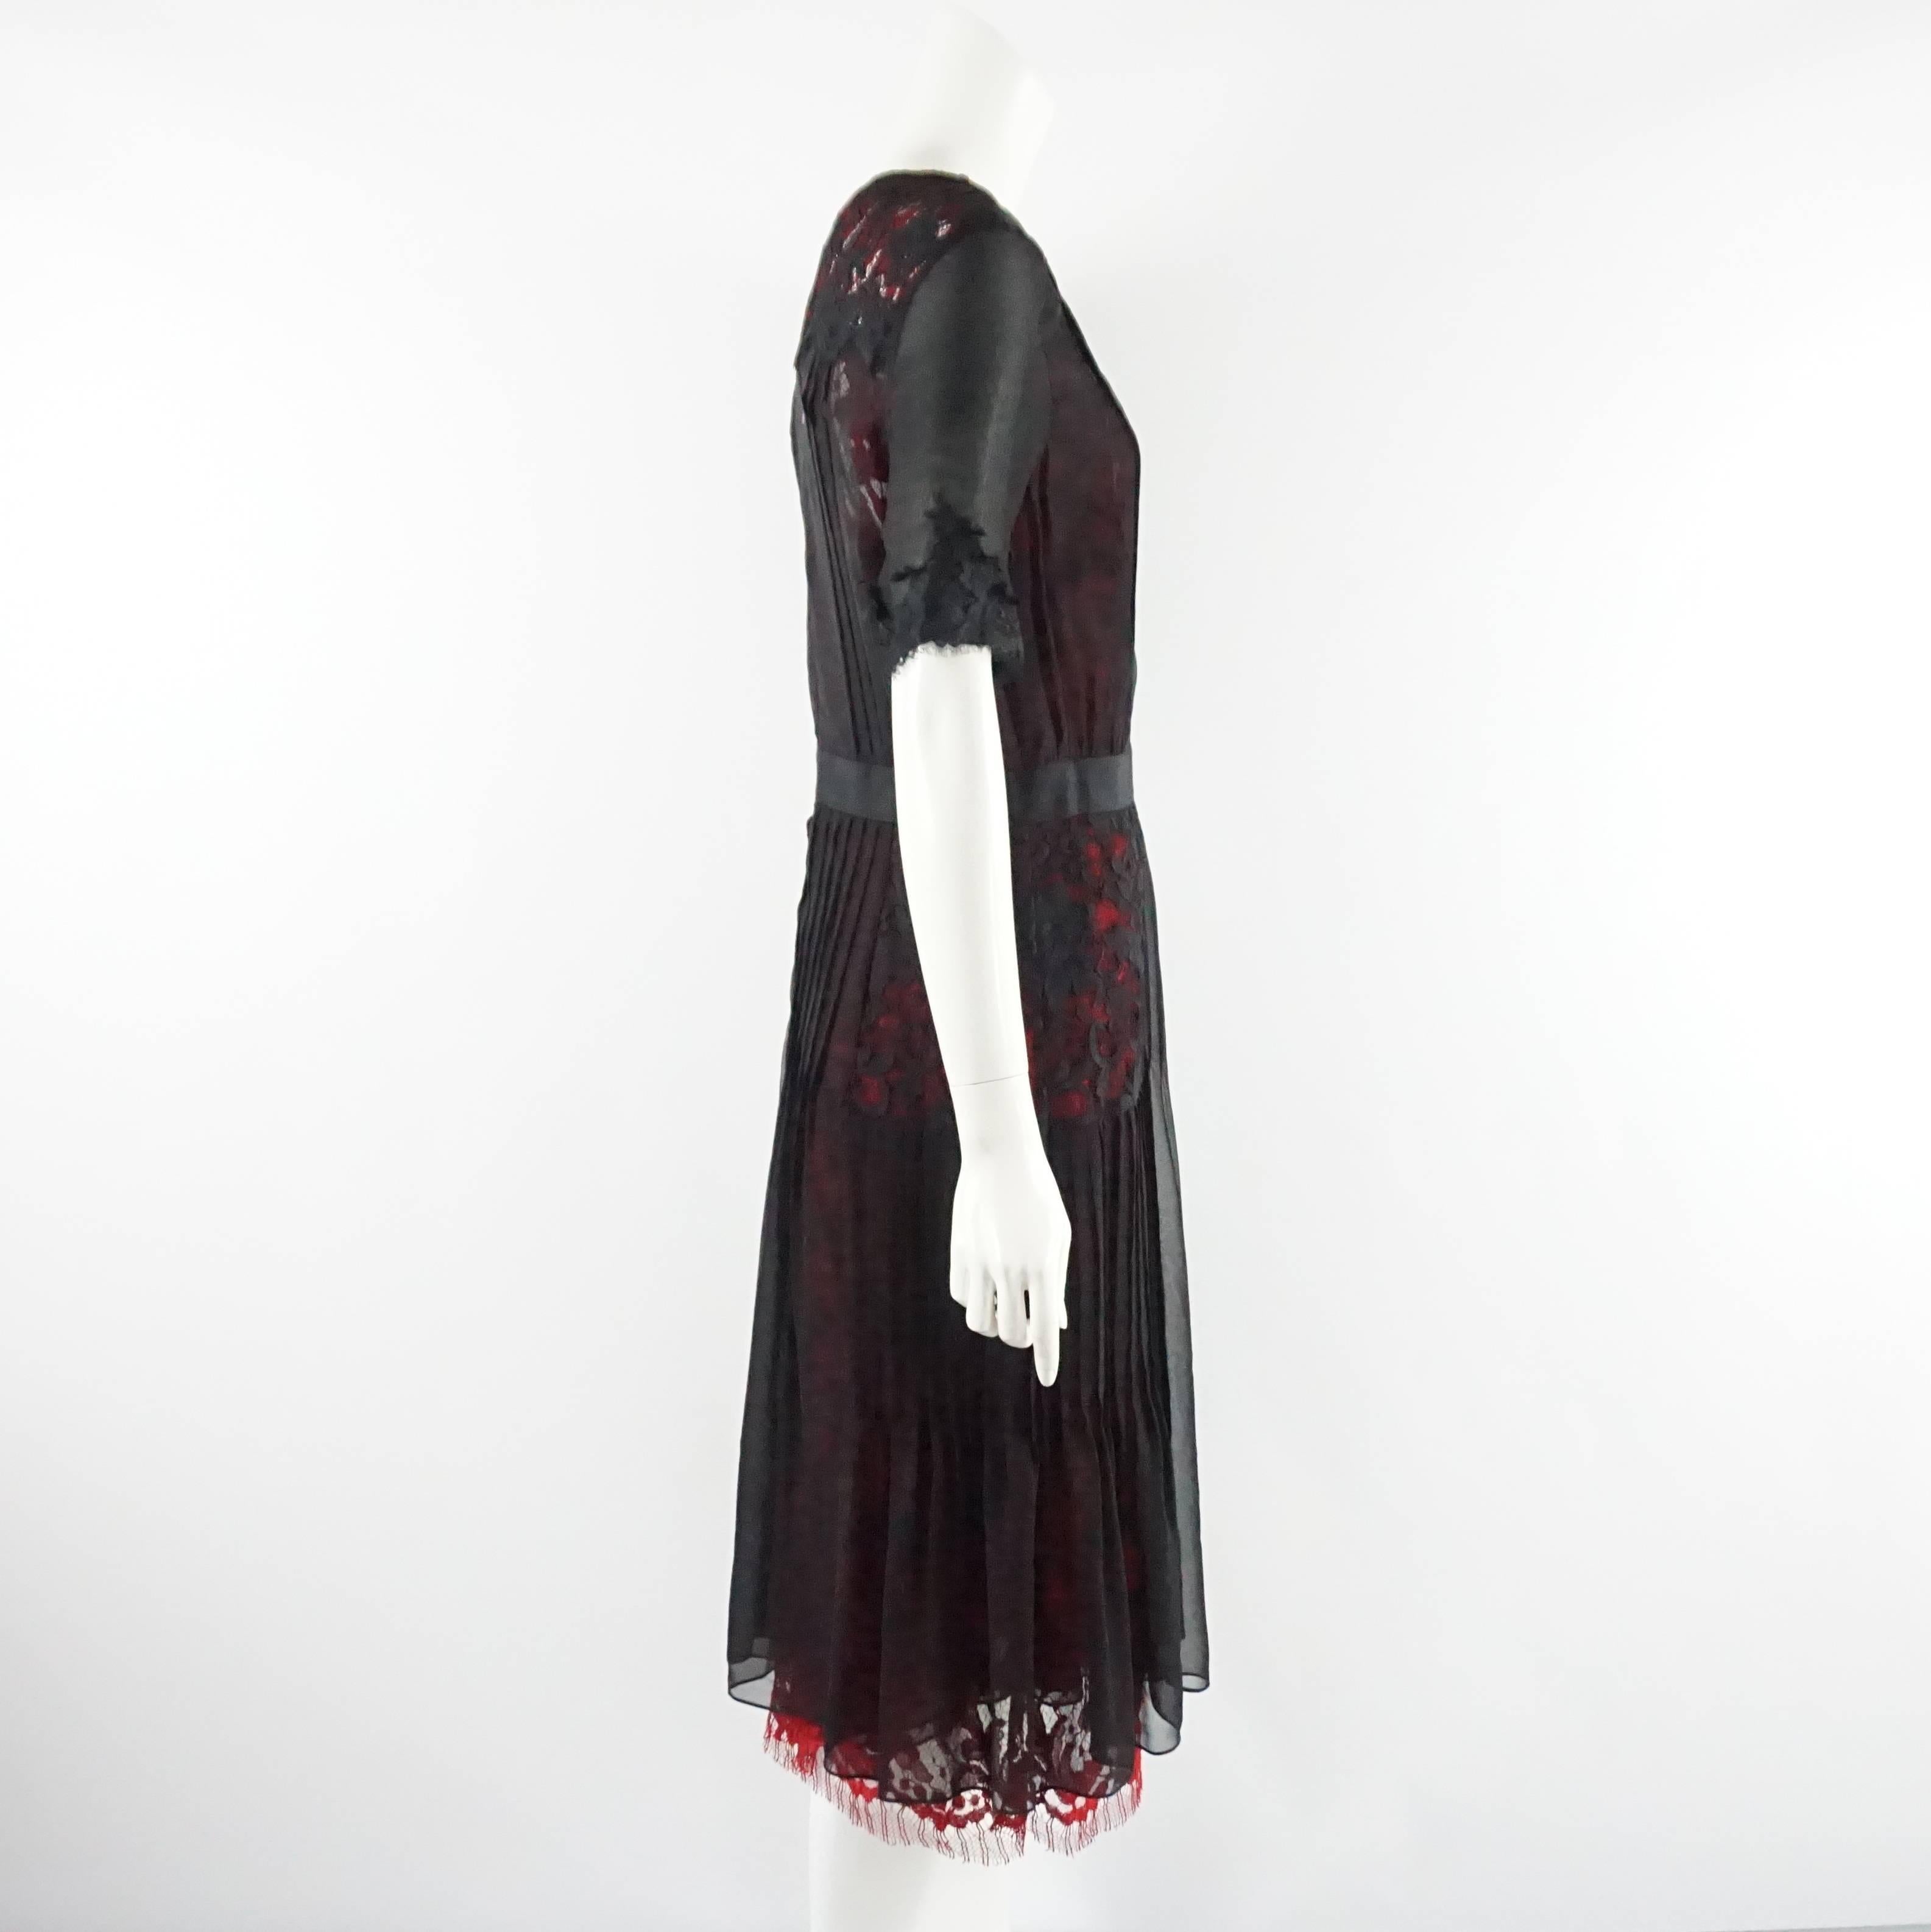 This Oscar de la Renta dress is black with a red underlay. It is made of silk chiffon and lace and has a black ribbon around the waist. This dress is in excellent condition and still has a tag. 

Measurements
Shoulder to Shoulder: 15